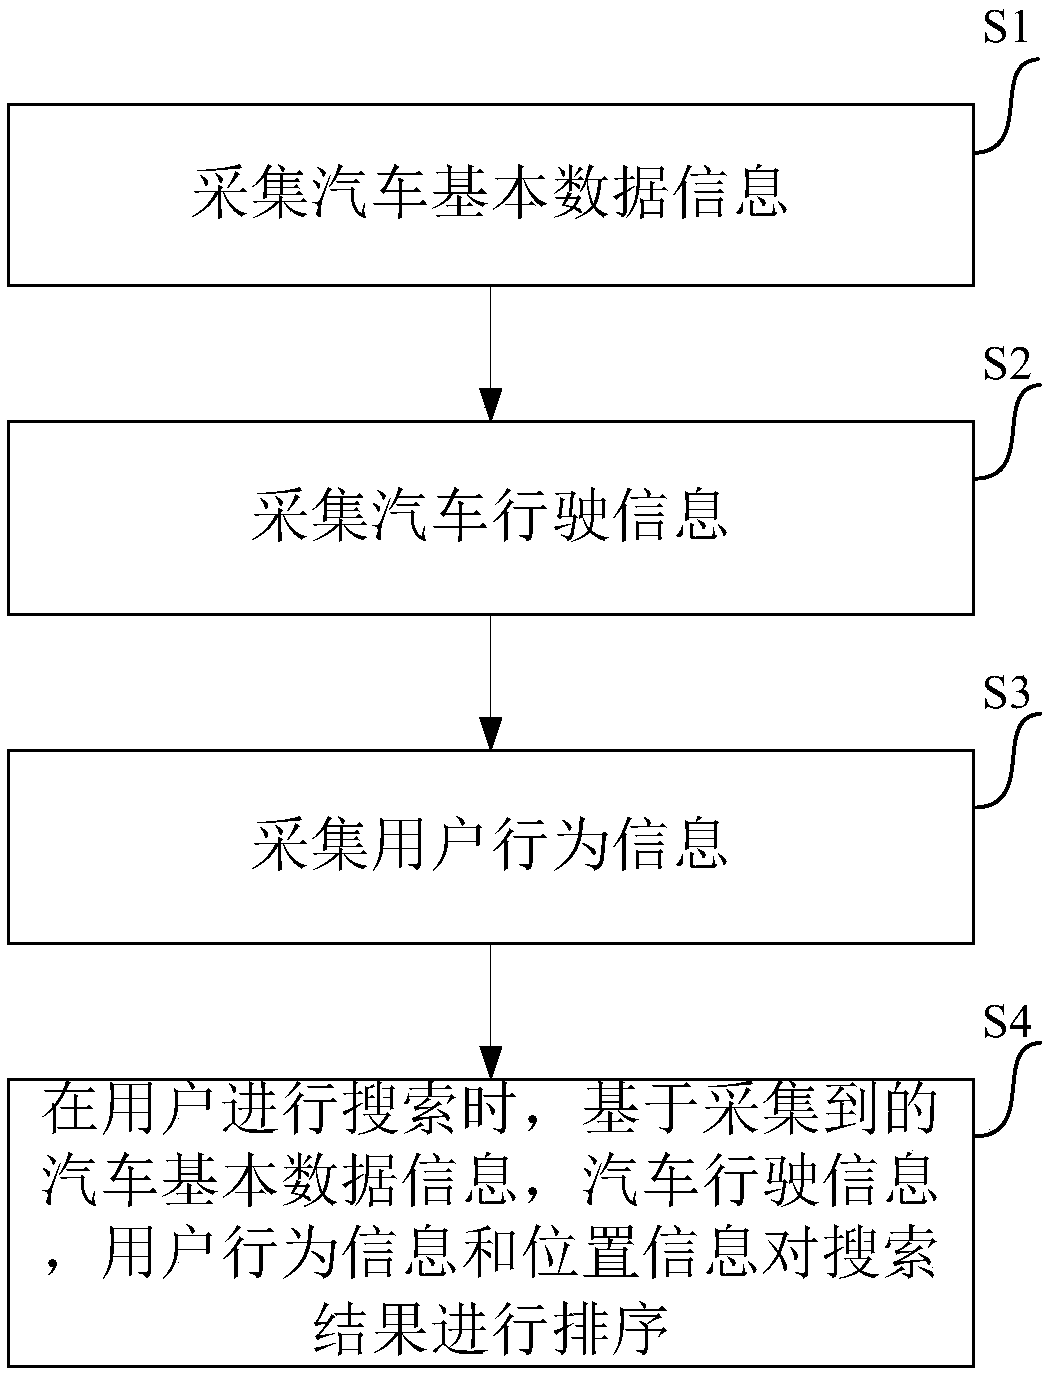 Automobile data-based LBS (location based service) searching and sequencing method and device